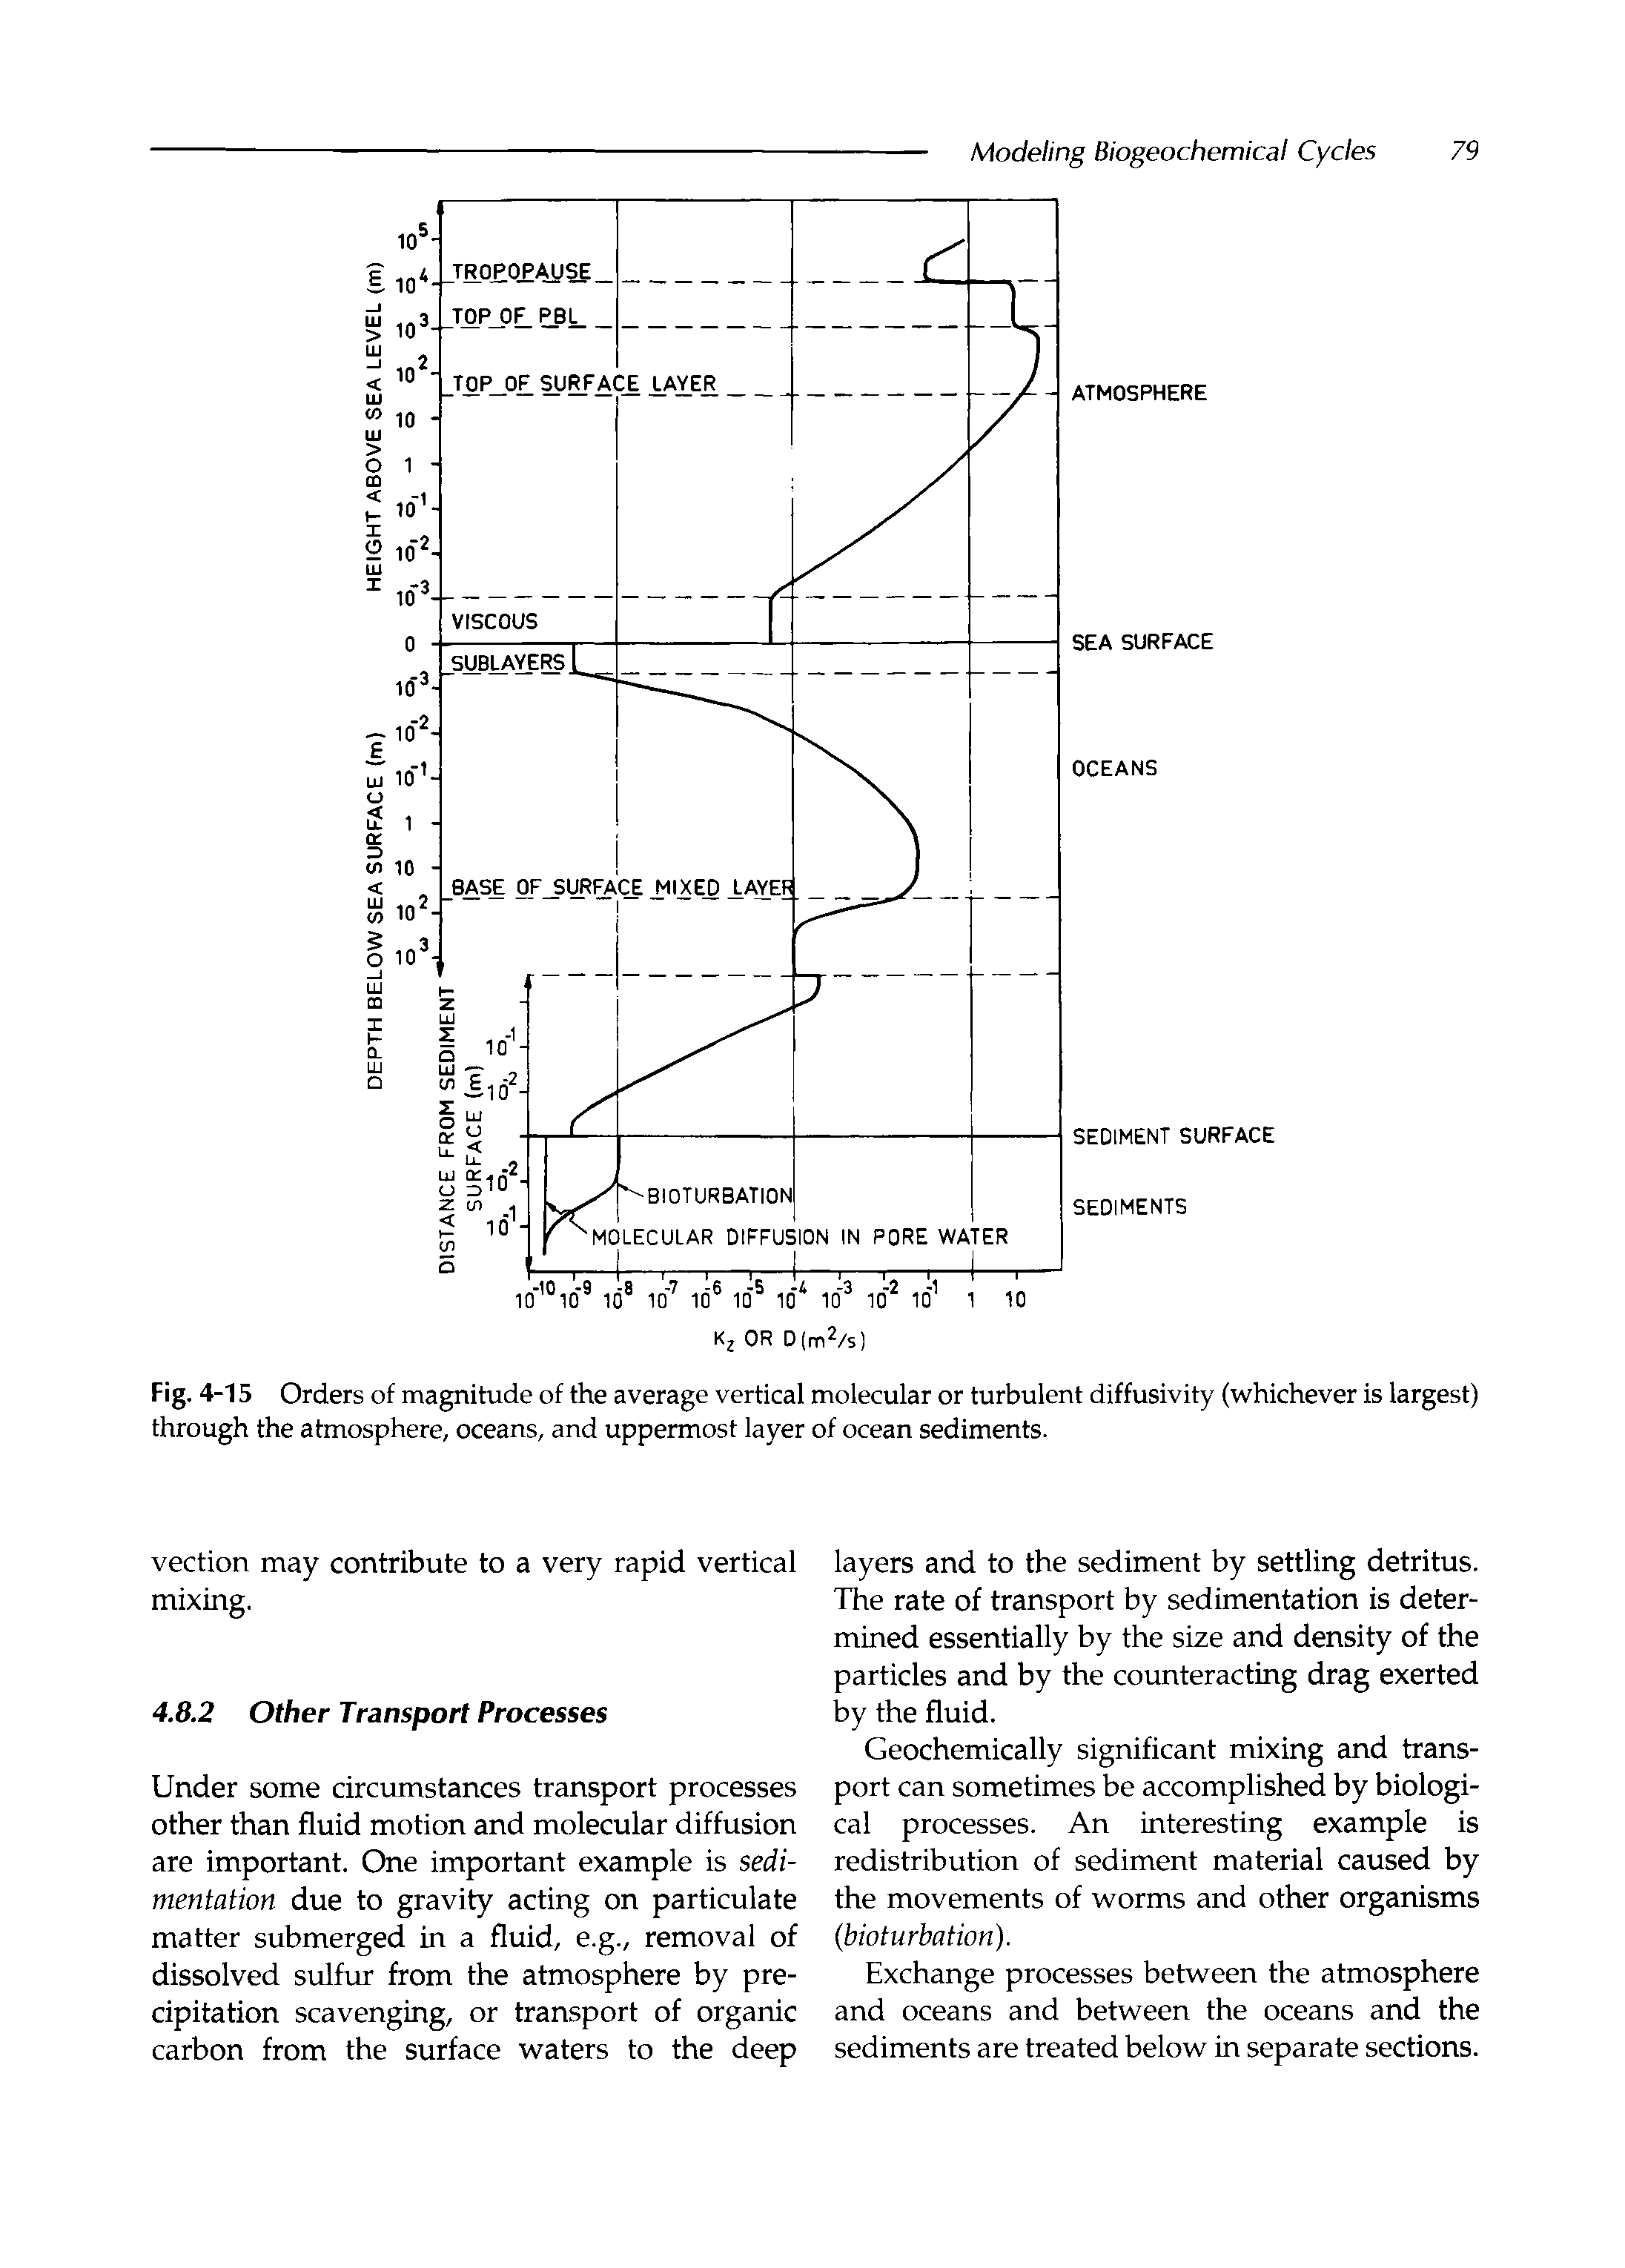 Fig. 4-15 Orders of magnitude of the average vertical molecular or turbulent diffusivity (whichever is largest) through the atmosphere, oceans, and uppermost layer of ocean sediments.